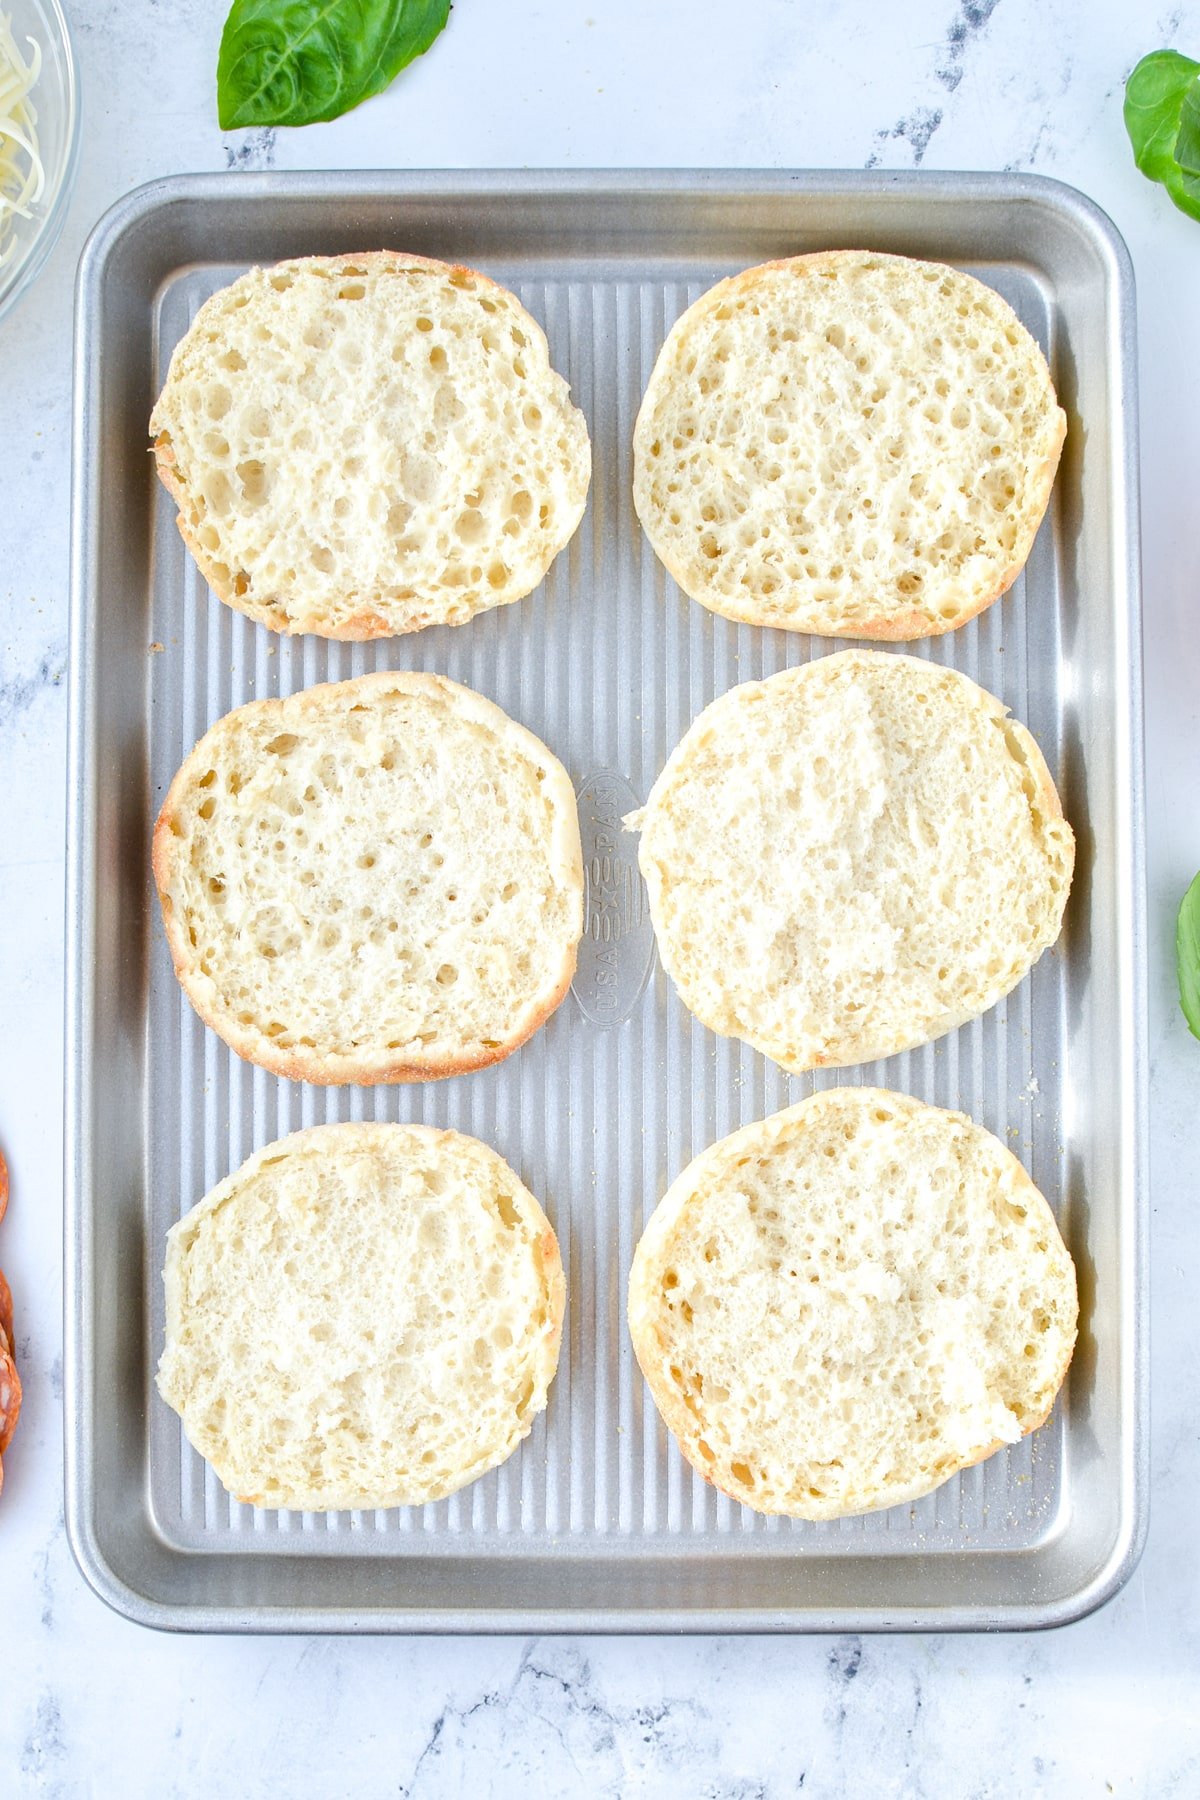 A baking sheet with English muffin halves on it.